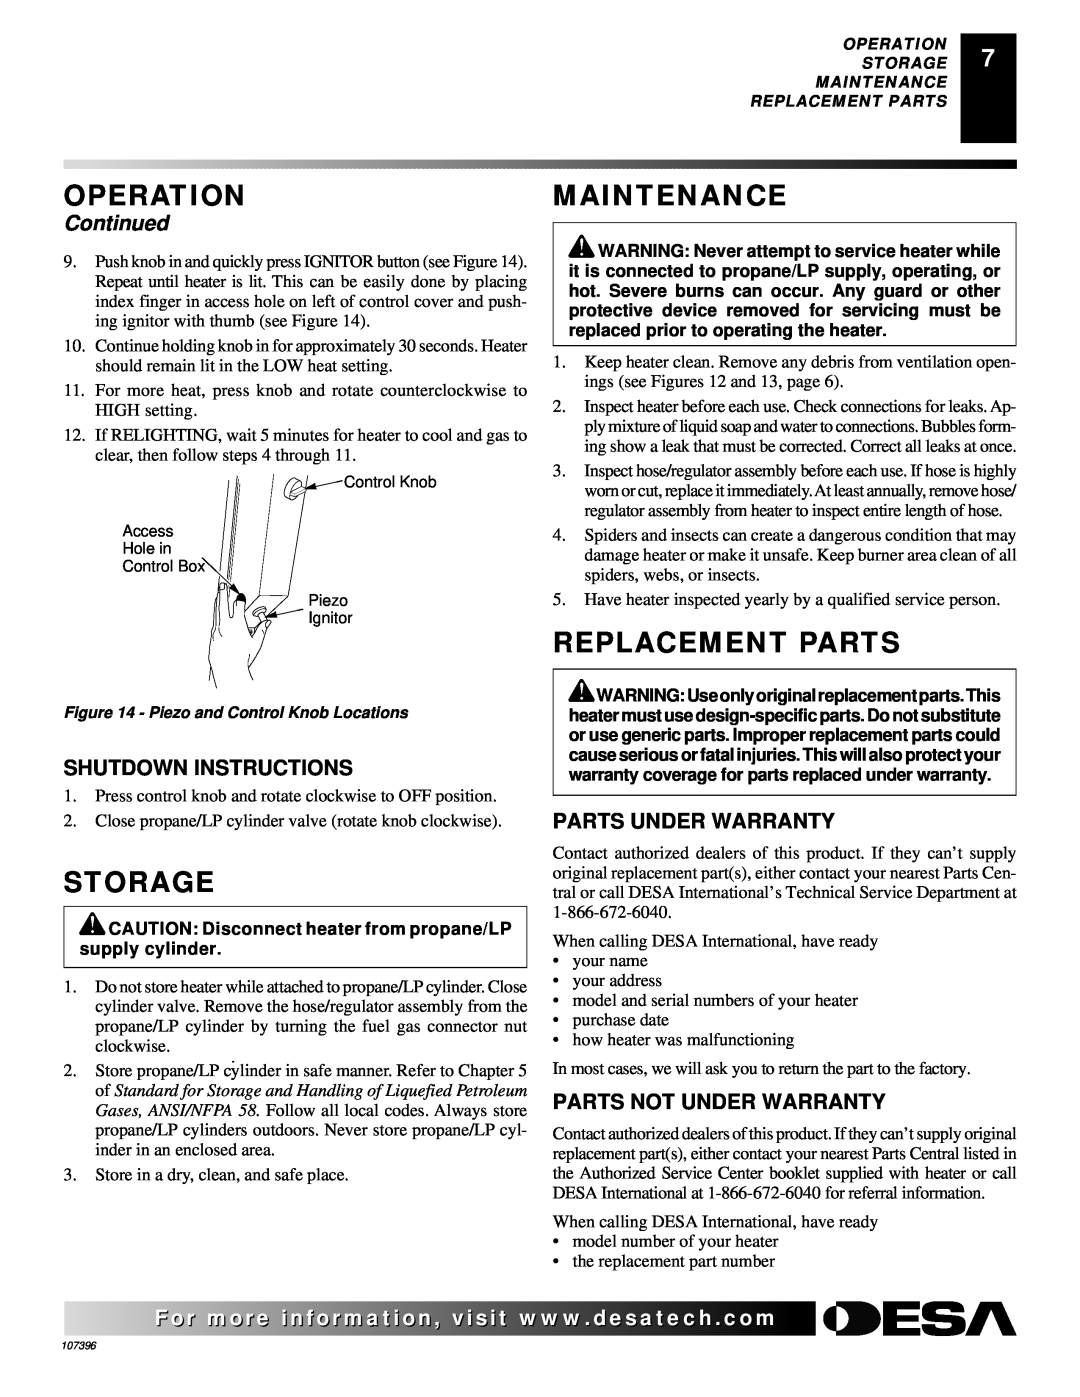 Desa 28BN installation manual Storage, Maintenance, Replacement Parts, Operation, Continued 